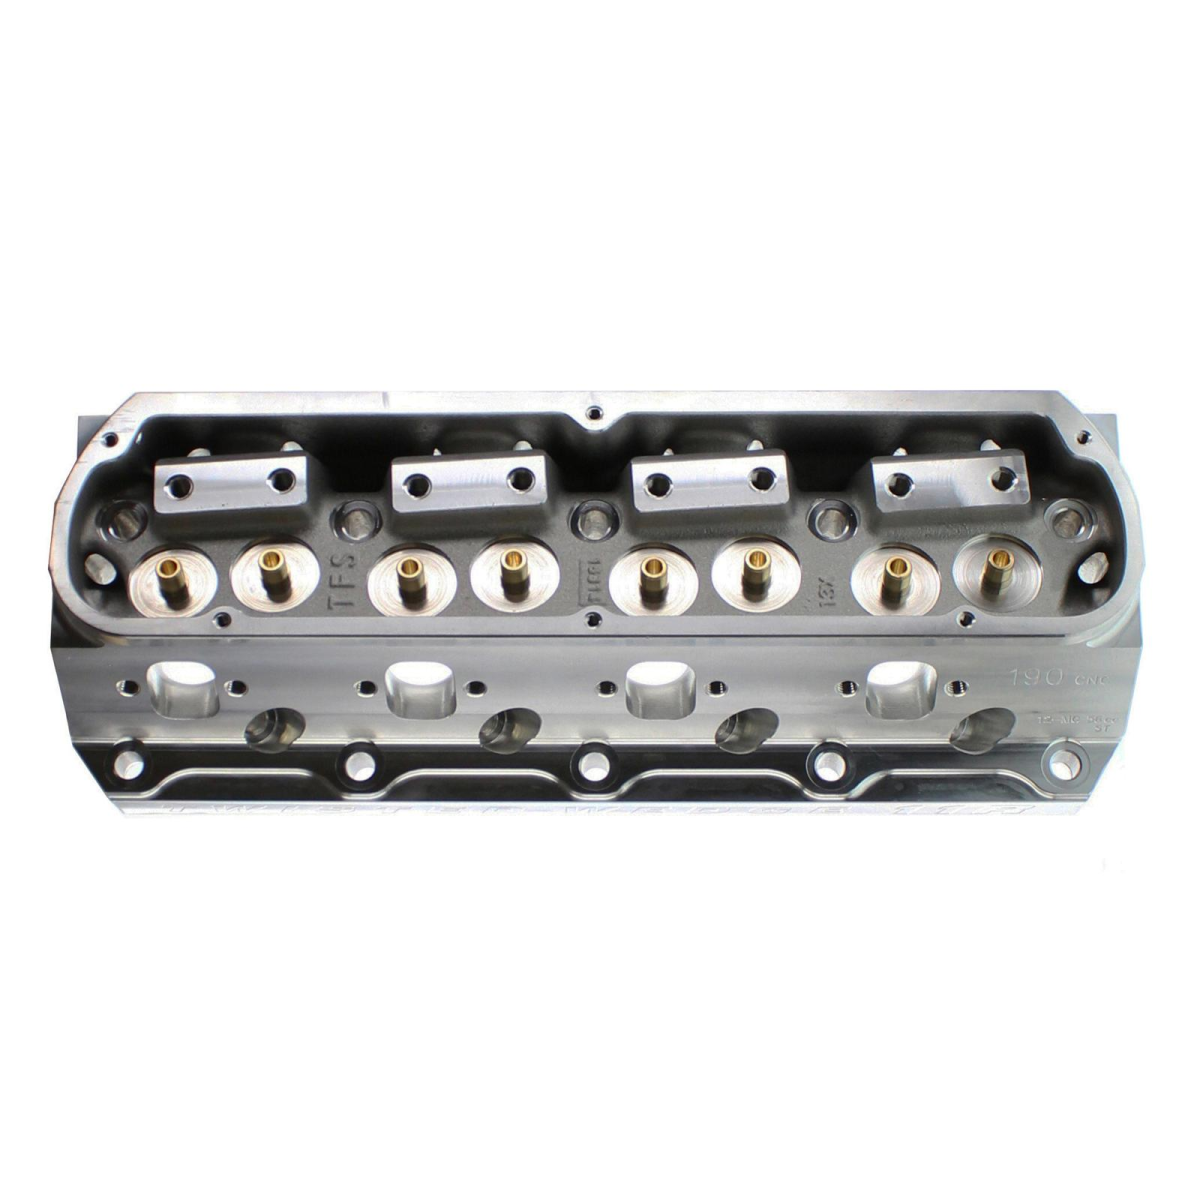 Trickflow - Trick Flow Twisted Wedge 11R Street 190cc Bare Cylinder Head Casting, SBF, 56cc Chambers - Image 1